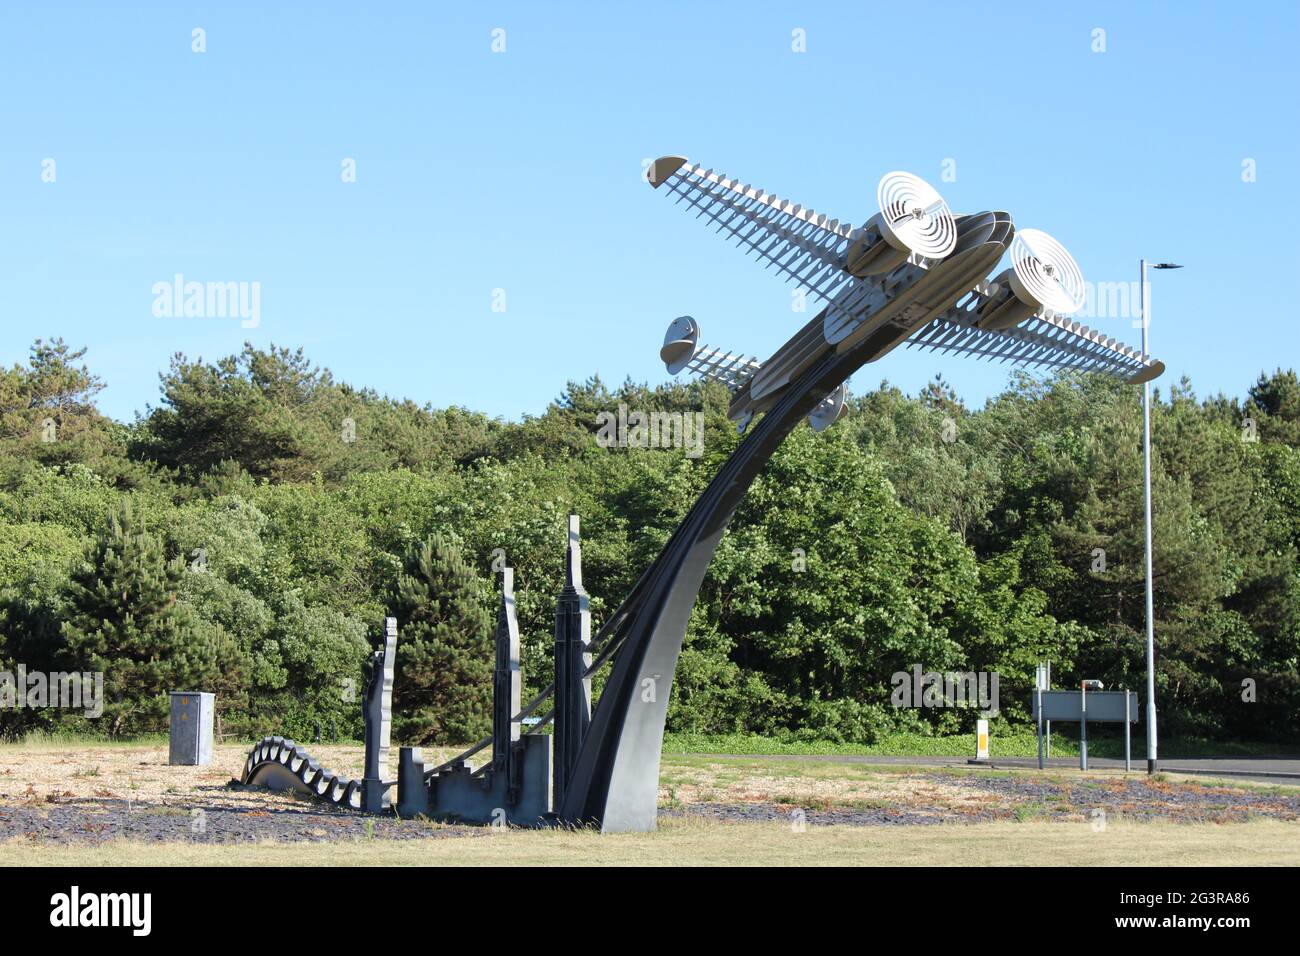 Ainsdale Sculpture of Lockheed Electra aeroplane . The twin engine monoplane commemorates a transatlantic flight made from Ainsdale beach to New York. Stock Photo